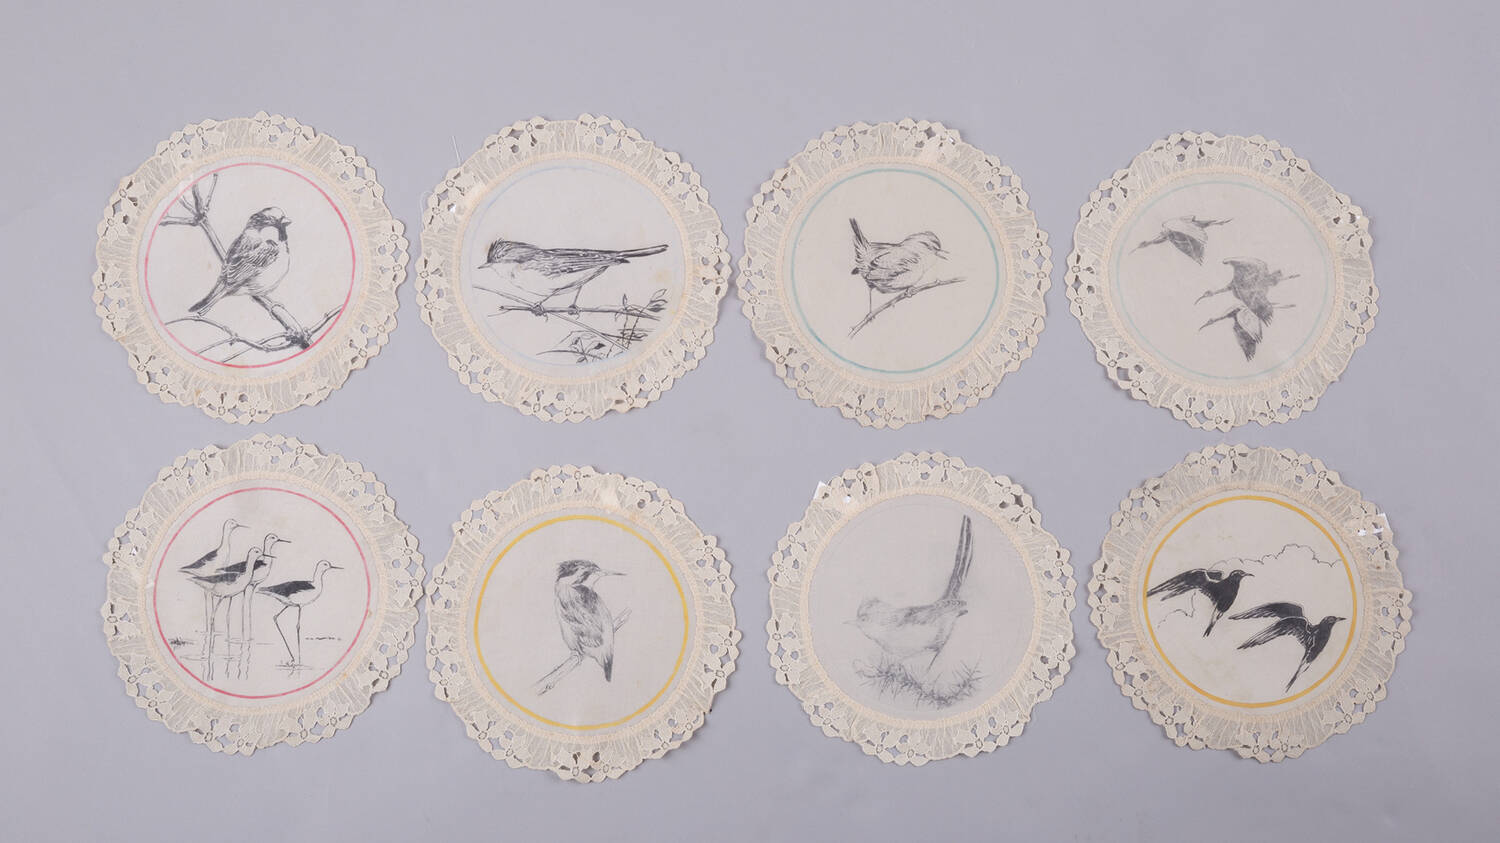 A series of 8 lace finger mats are displayed. Each contains a hand-painted black and white bird illustration.